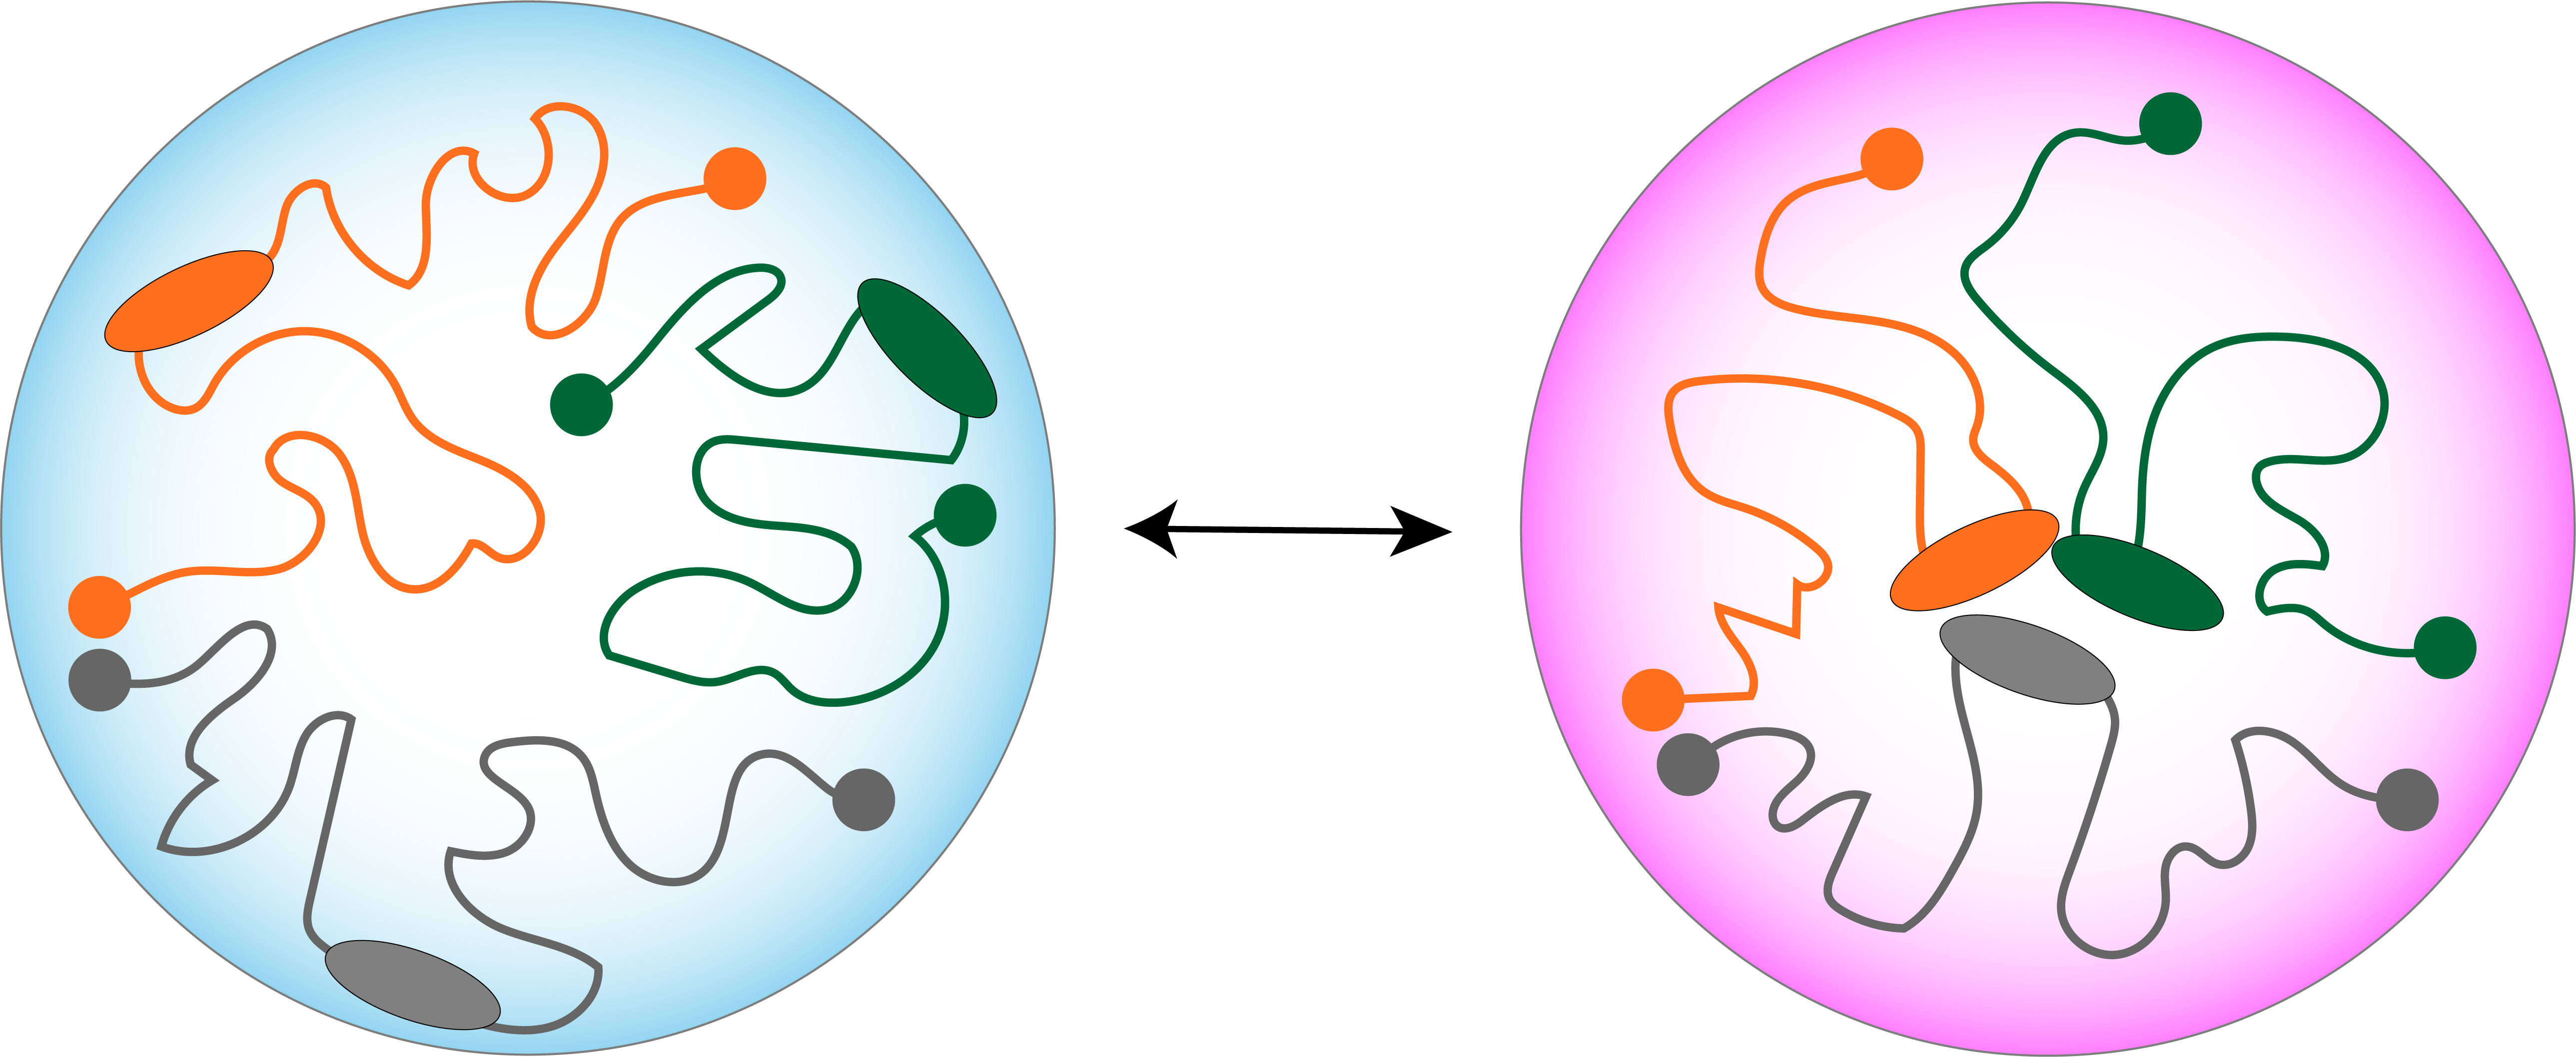 Image of two cell conditions showing how nuclear DNA can rearrange